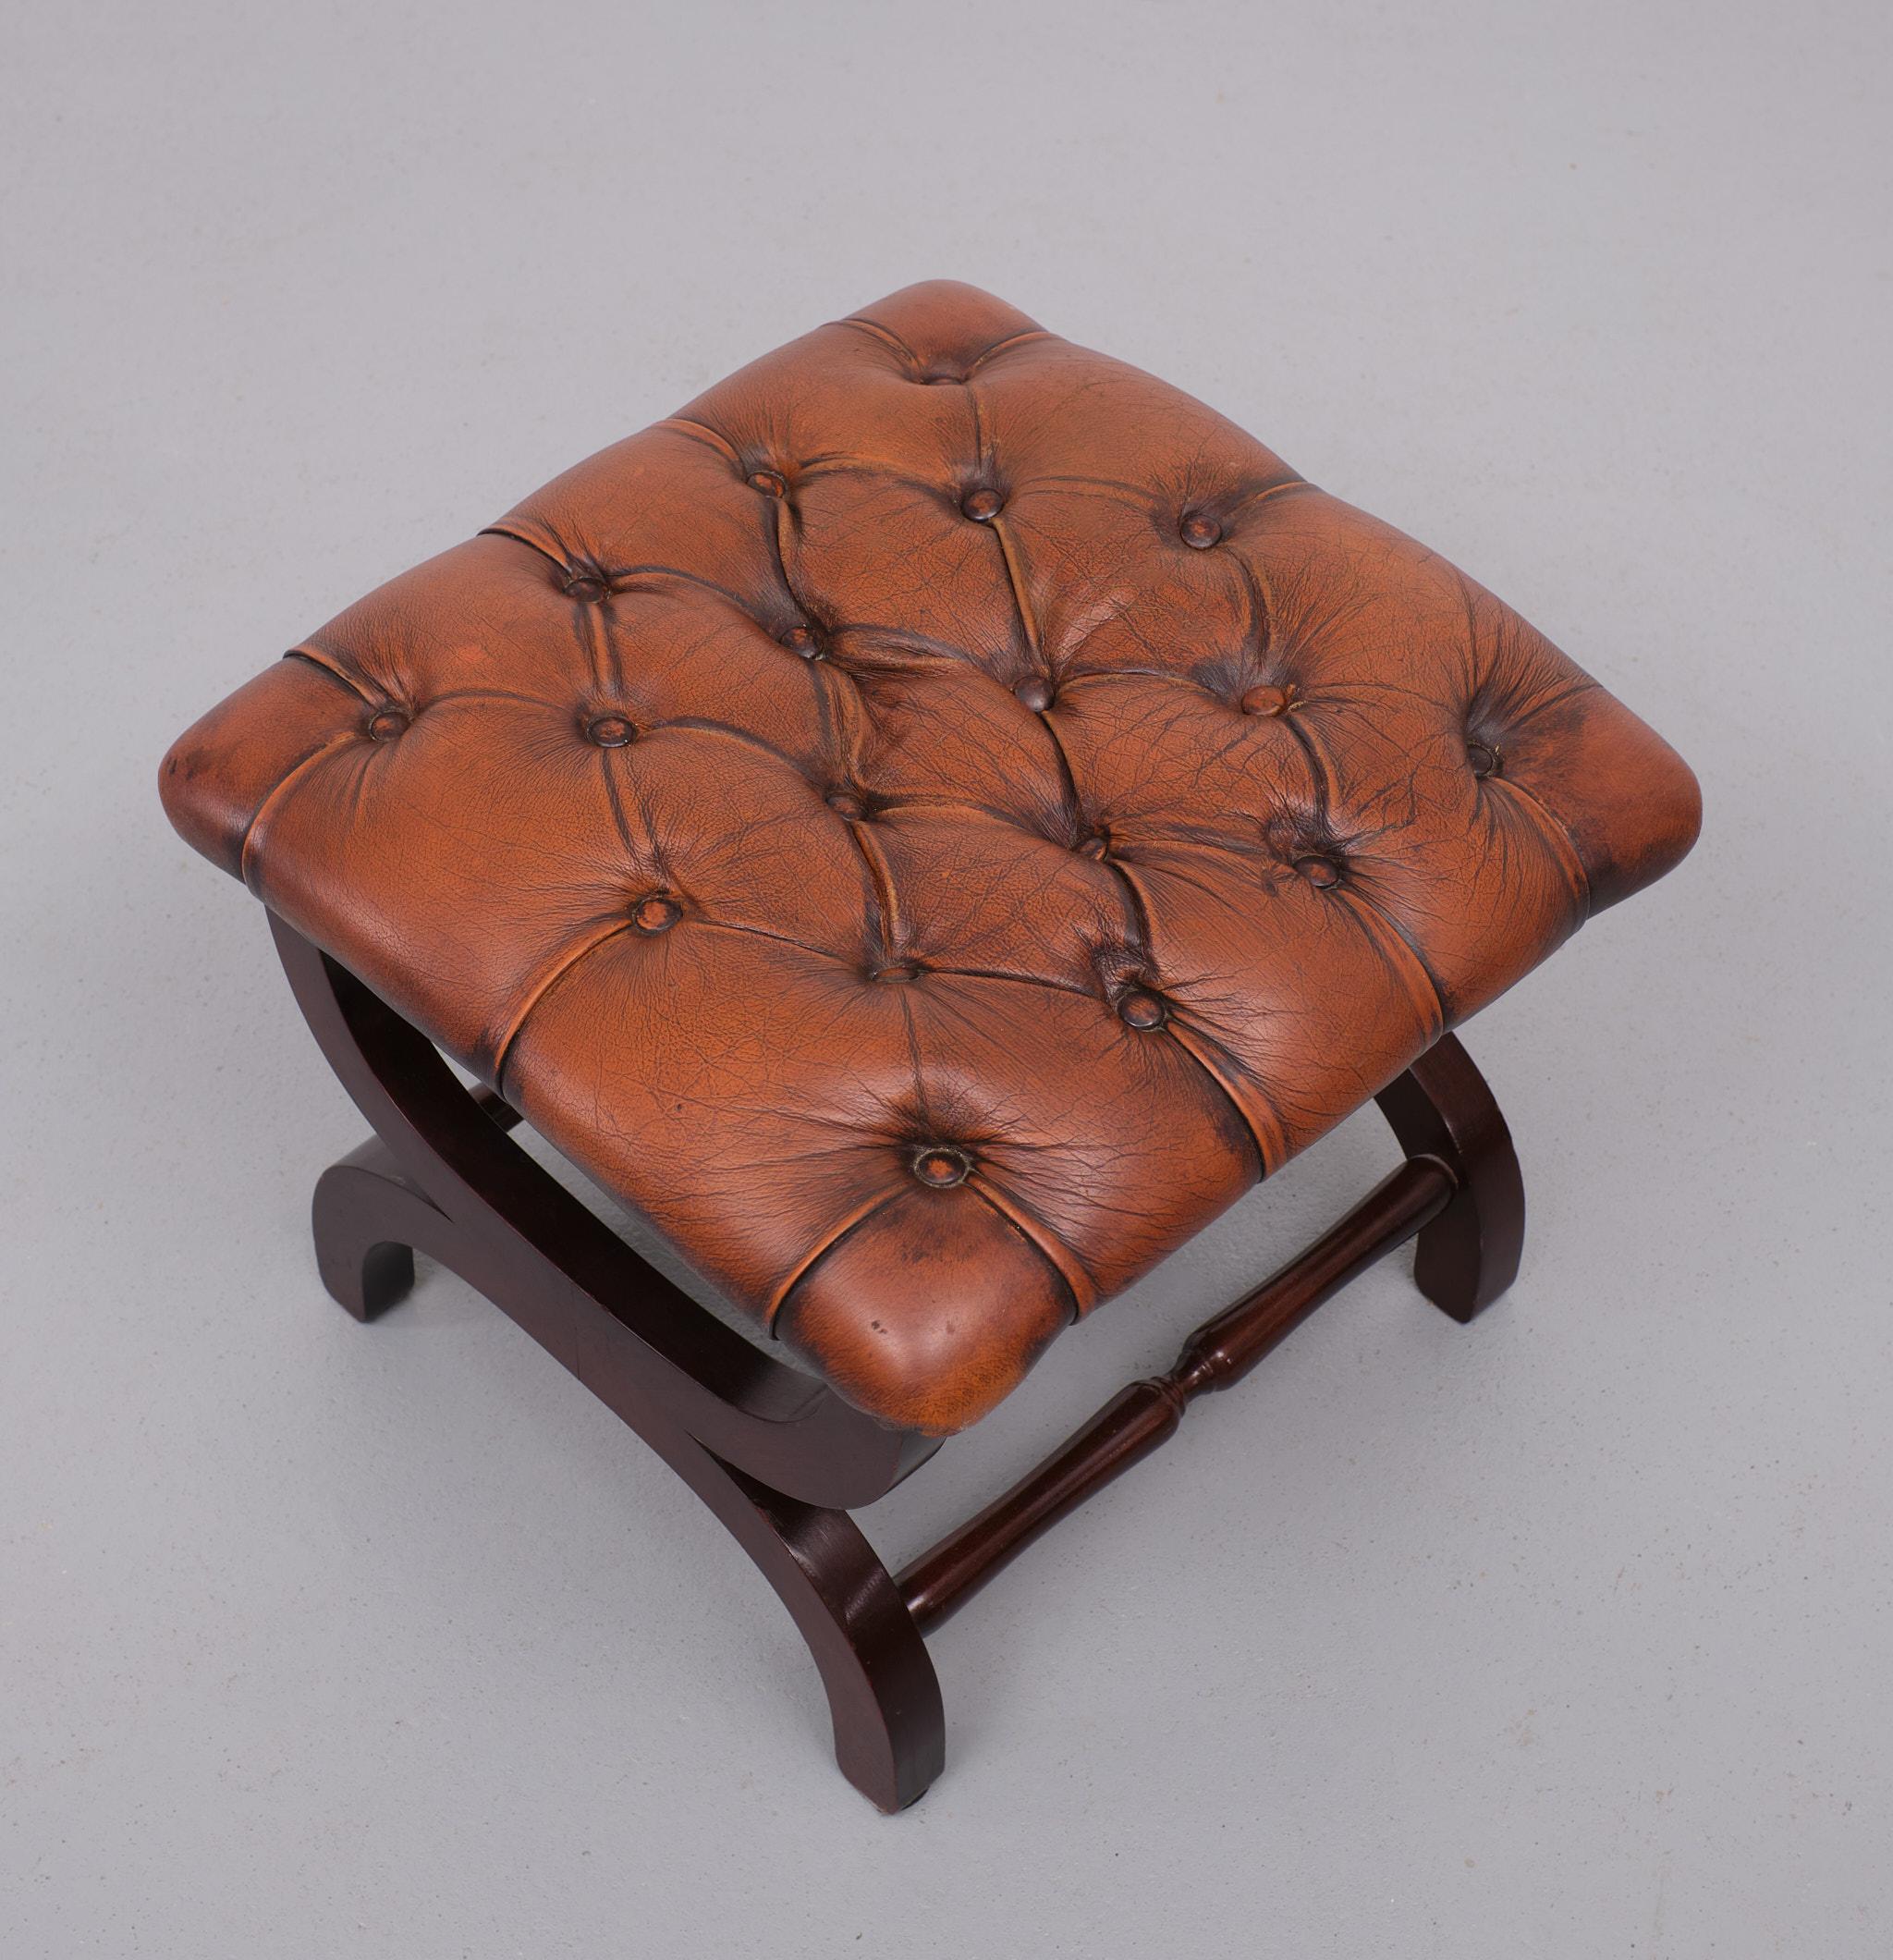 English Country House Style Padded Leather Ottoman In Good Condition For Sale In Den Haag, NL